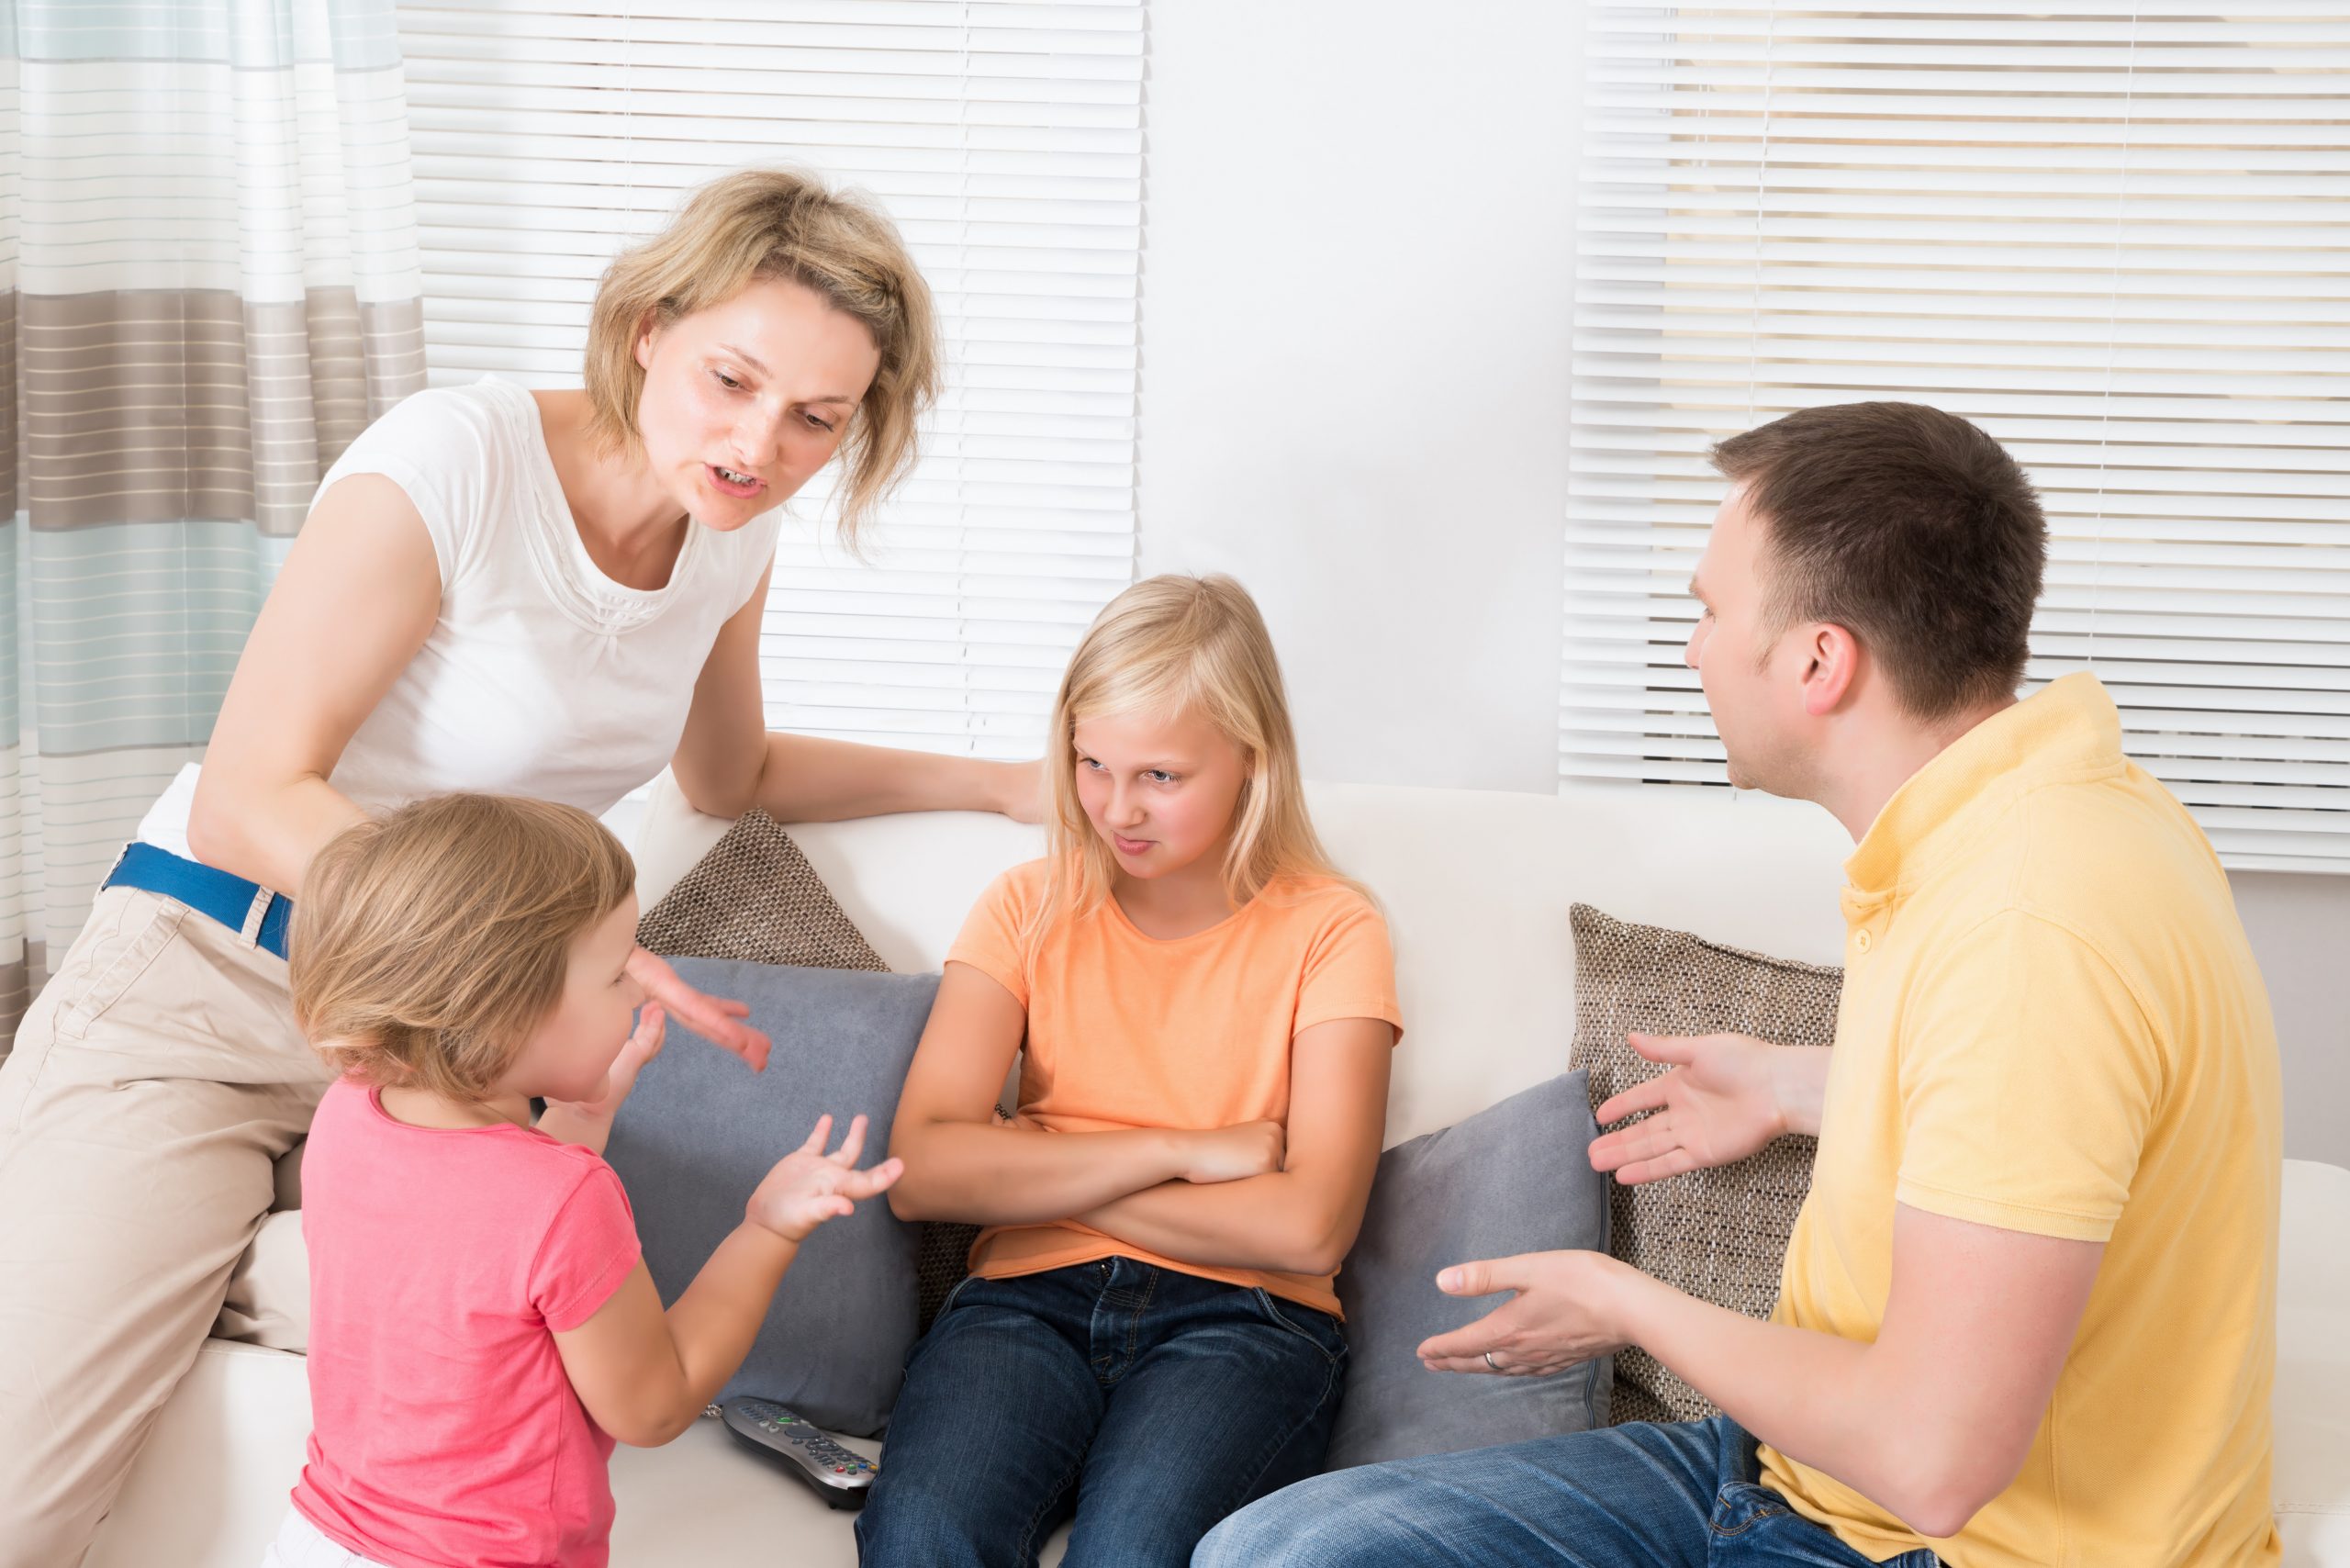 Image of an upset family having argument at home. If you need support in reconnecting with your partner, learn how couples therapy in Englewood, CO can help you.